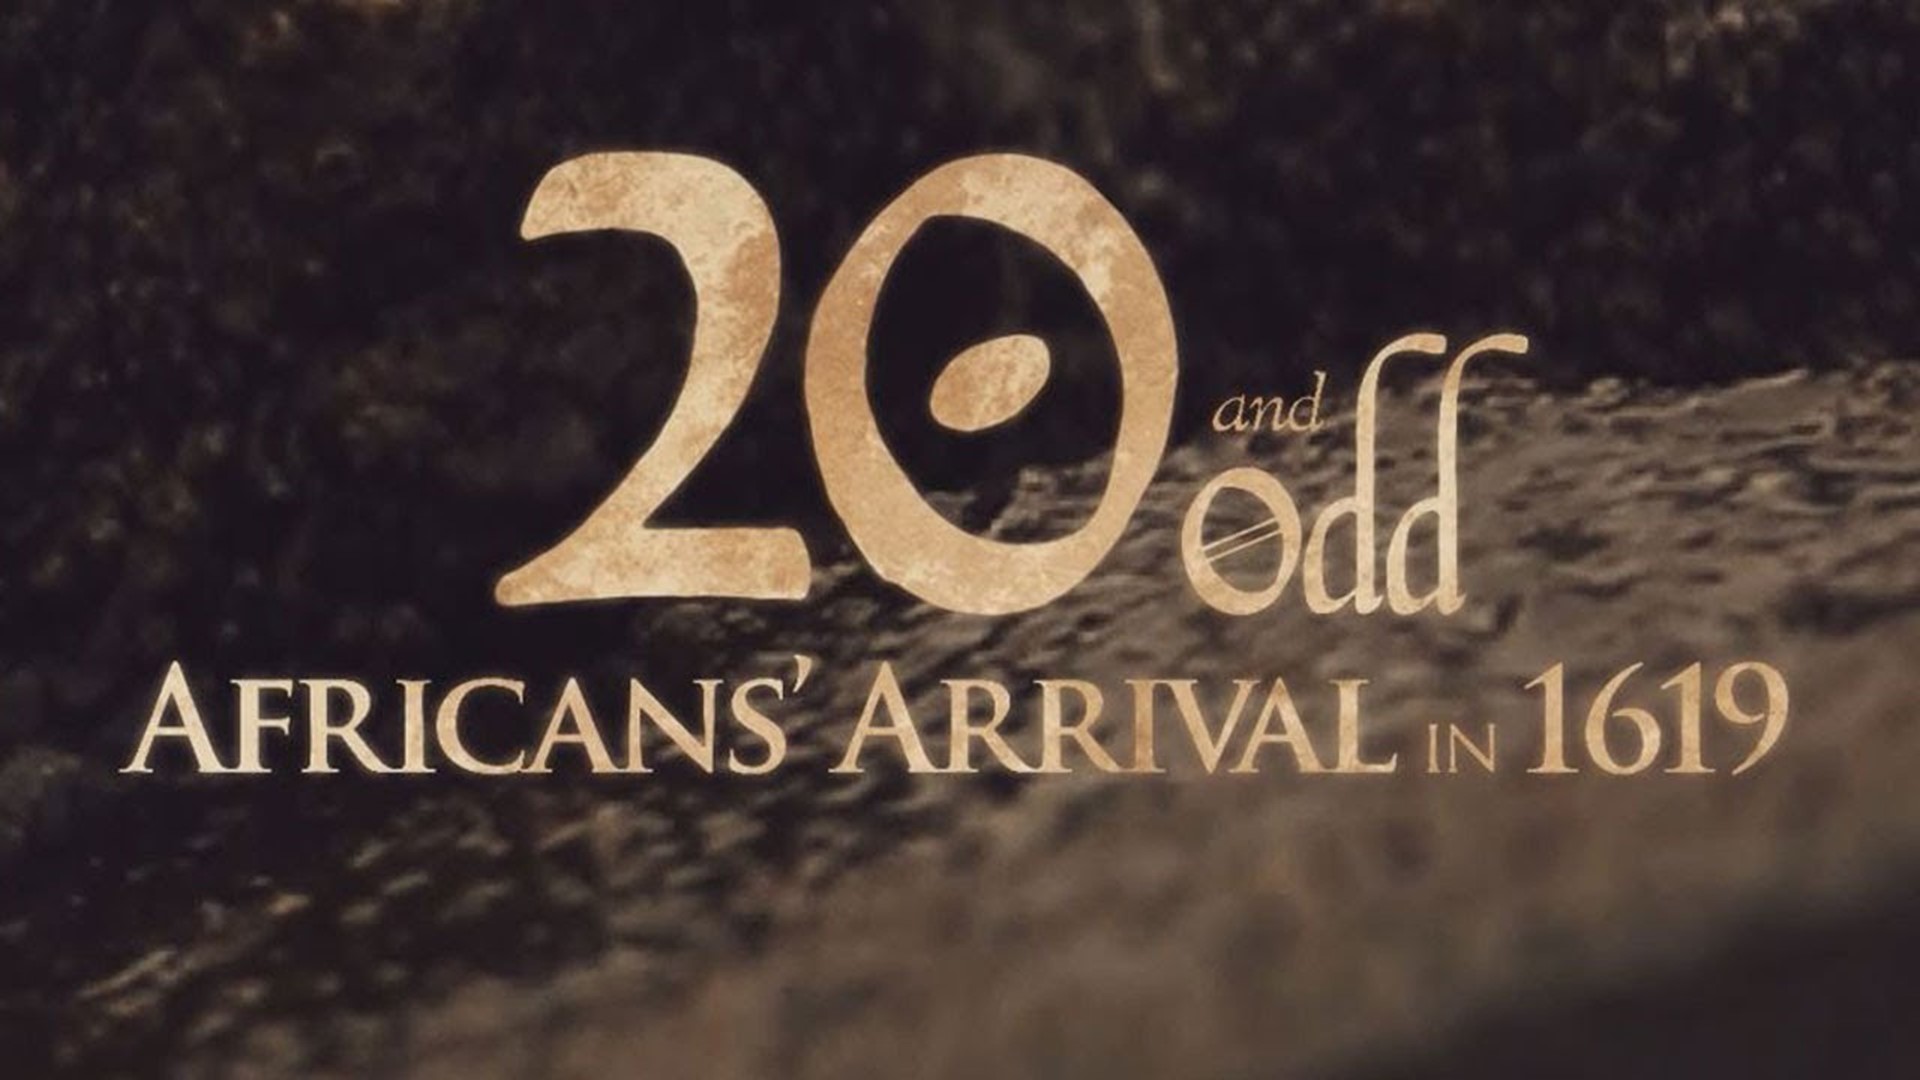 13News Now documentary '20 and Odd: Africans' Arrival in 1619' looks at the extraordinary story of the first Africans who arrived in English North America.